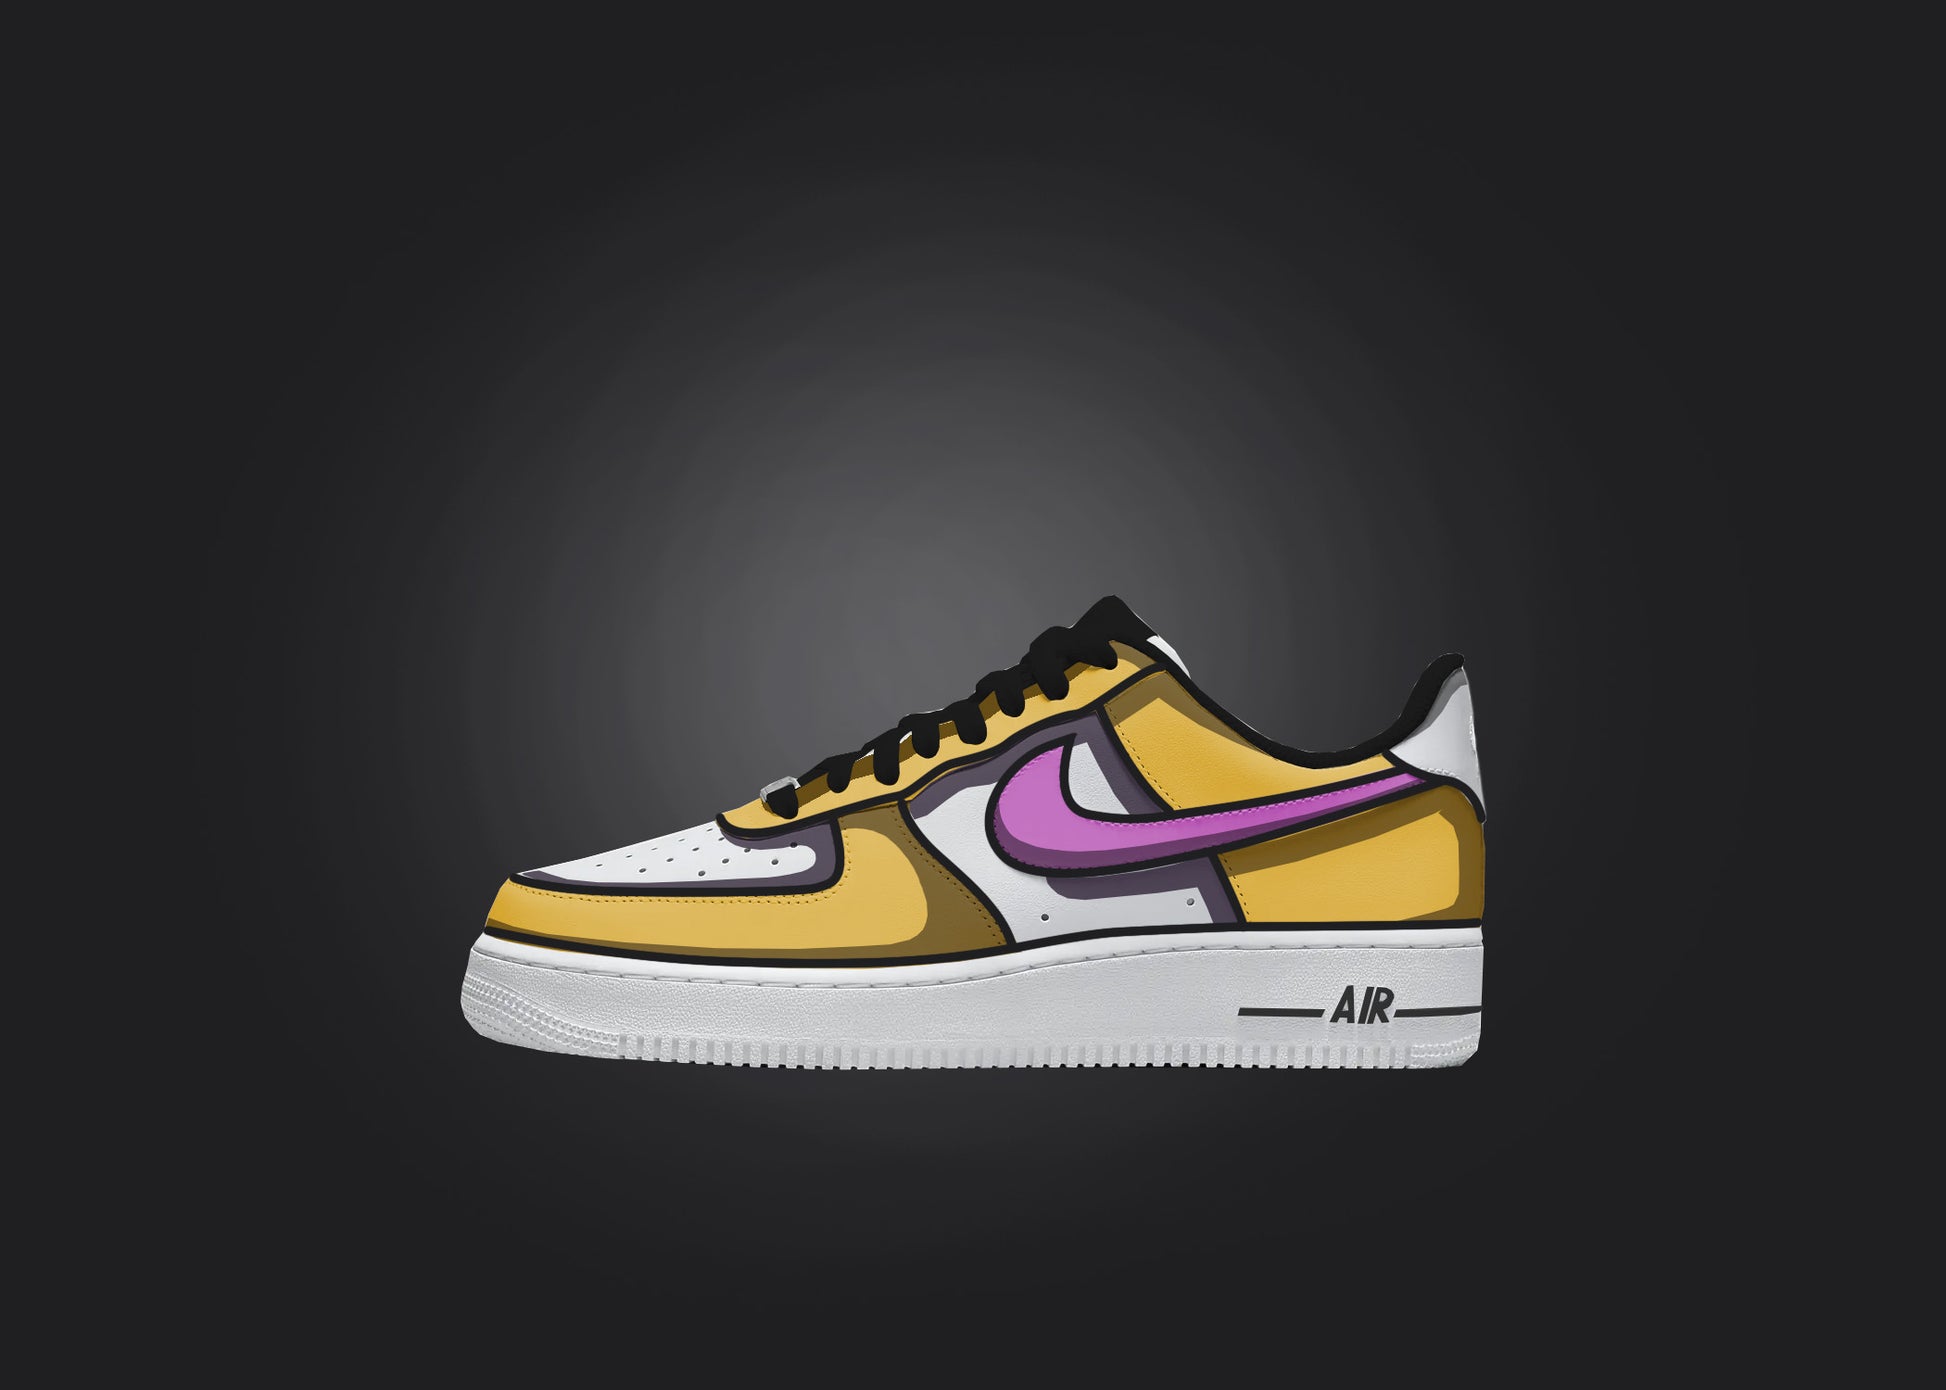 custom nike air force 1 sneaker with a shadow cartoon design in yellow and purple covering the sneakers